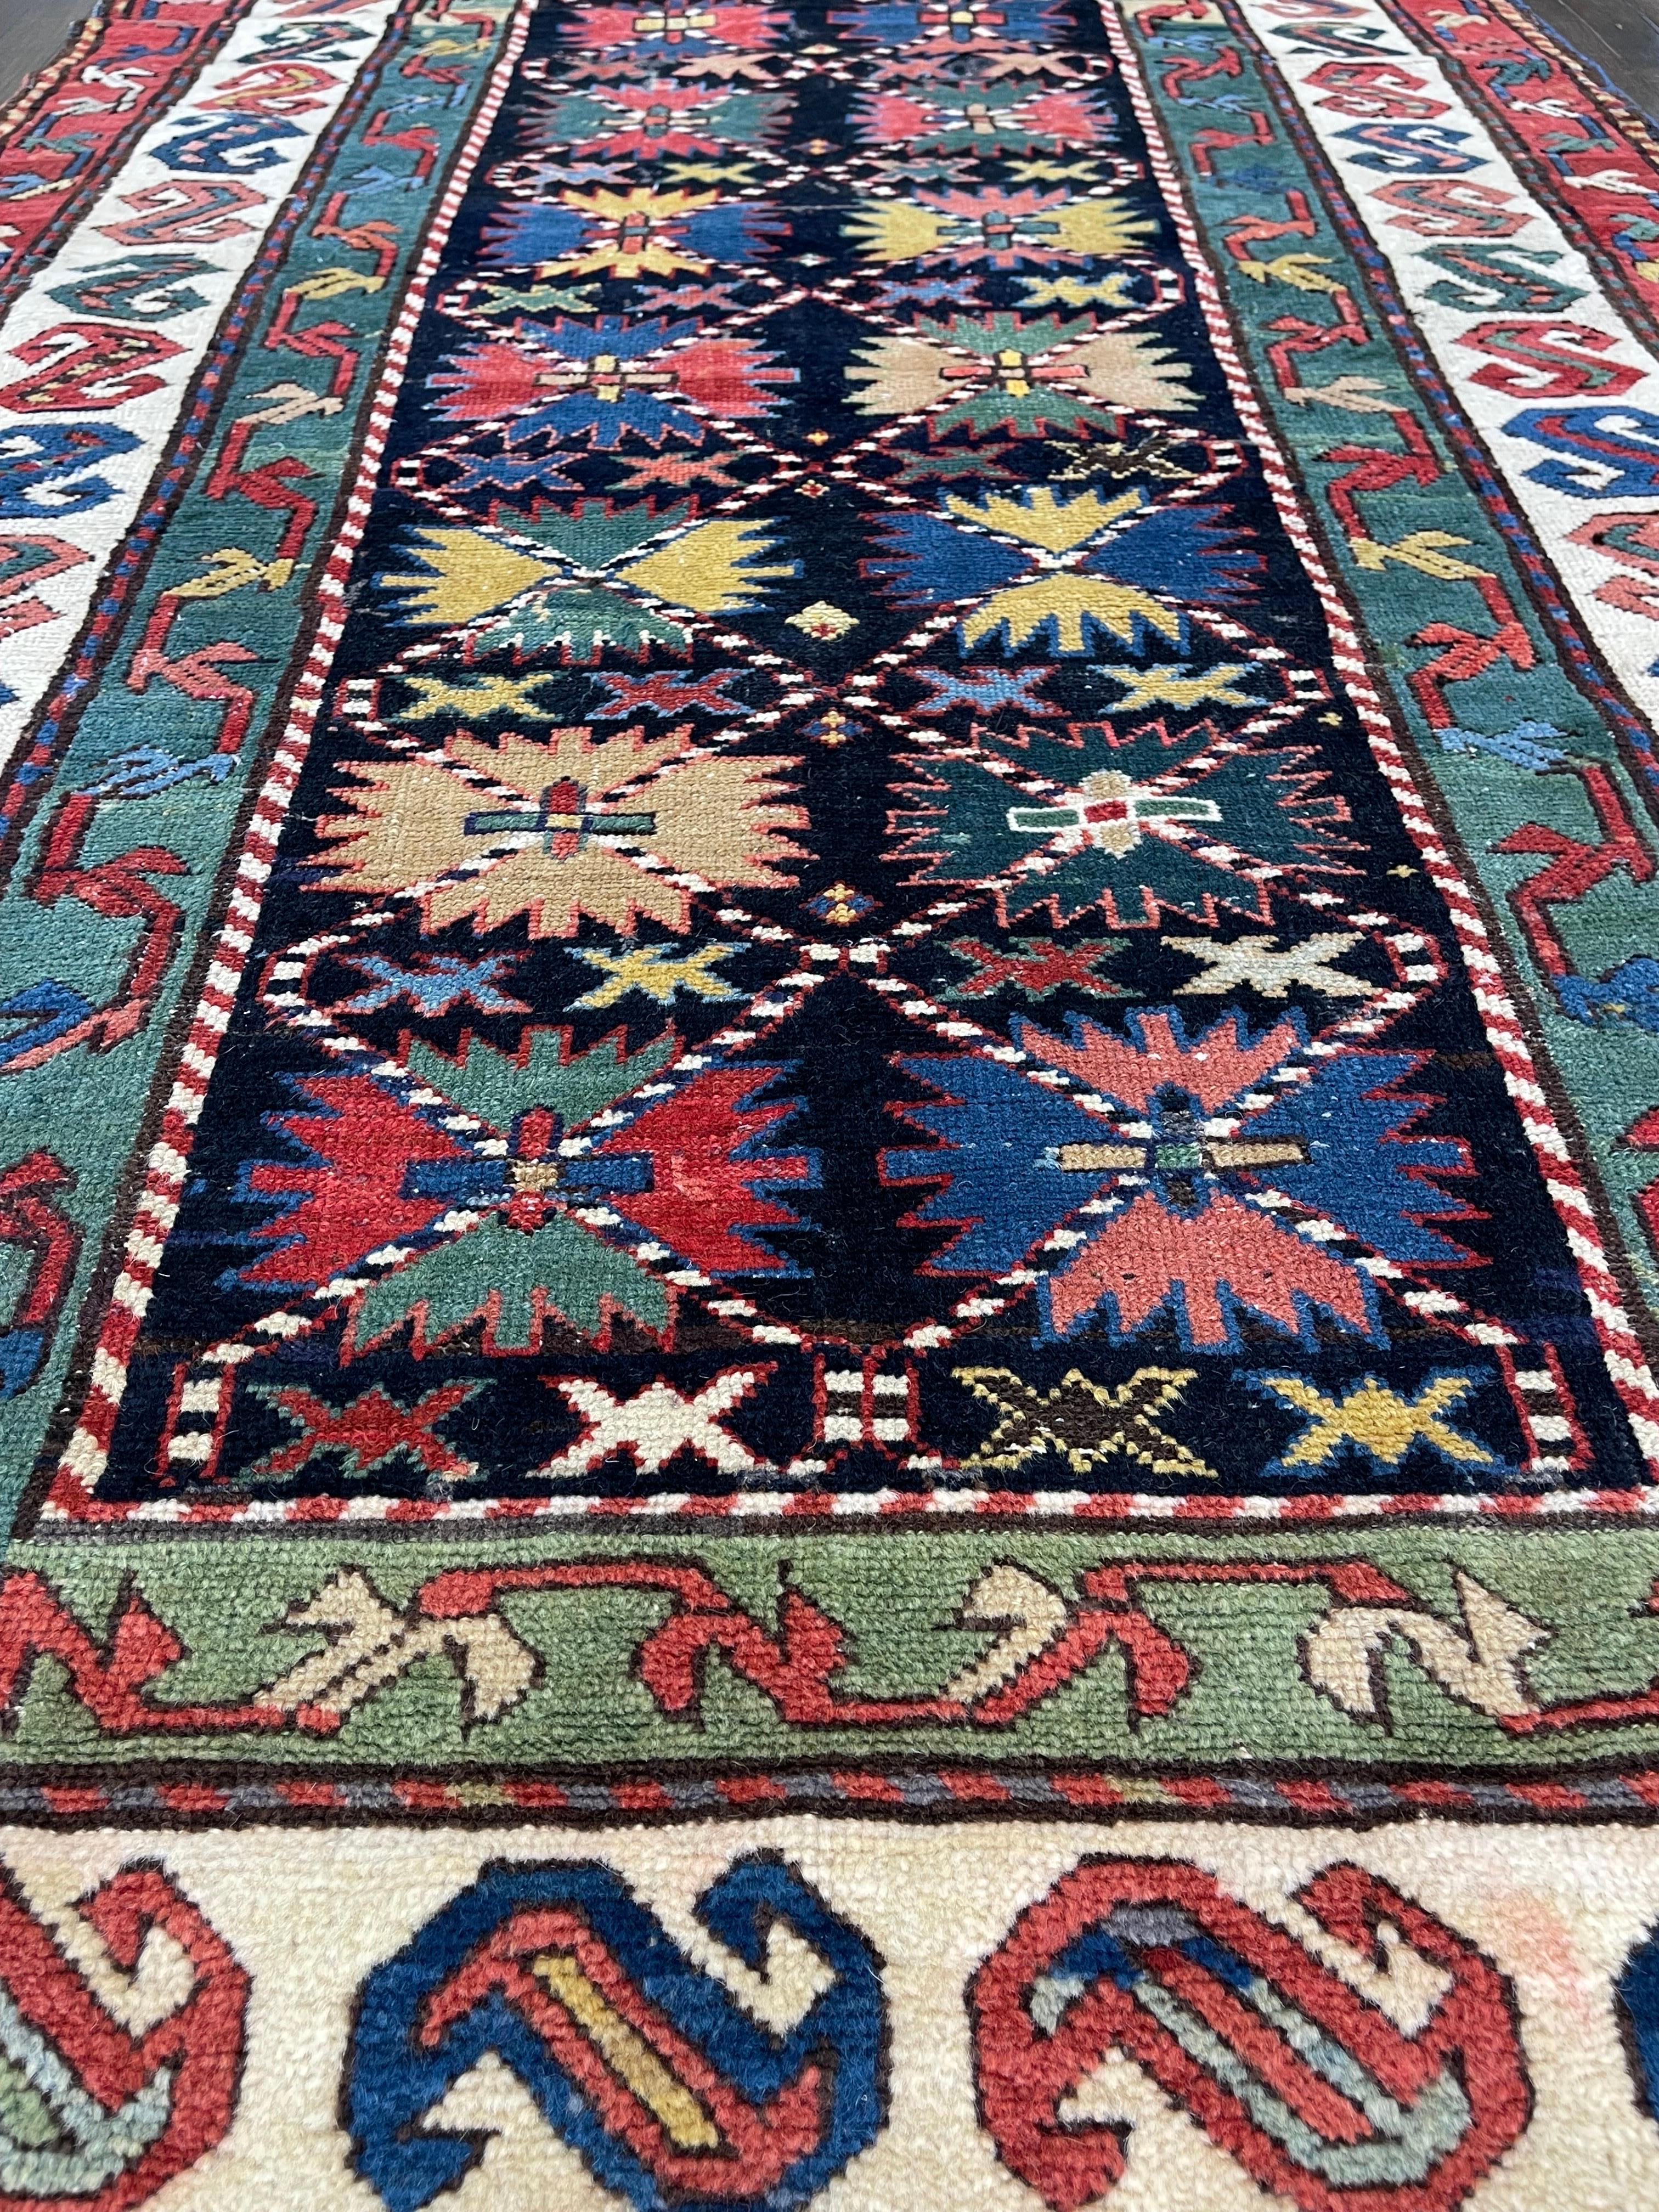 Vegetable Dyed Antique Caucasian Shirvan Rug, circa 1900 For Sale